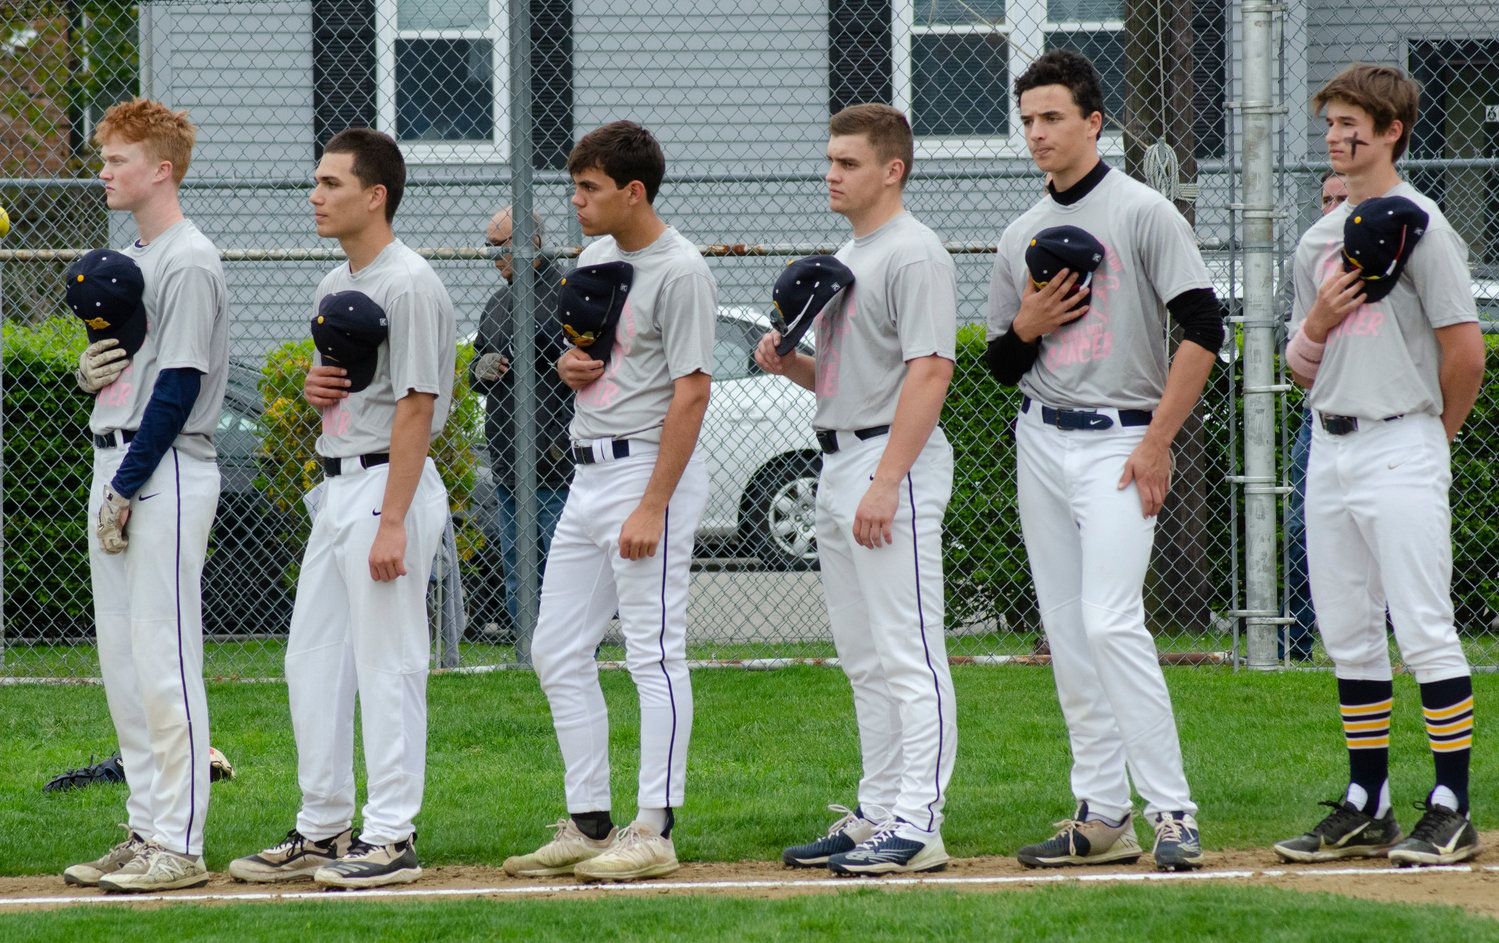 Barrington starters line up during the playing of the National Anthem for Friday’s game against Mt. Hope. The two teams used the game as a fund-raiser for the Jimmy Fund, collecting more than $5,000 in donations.